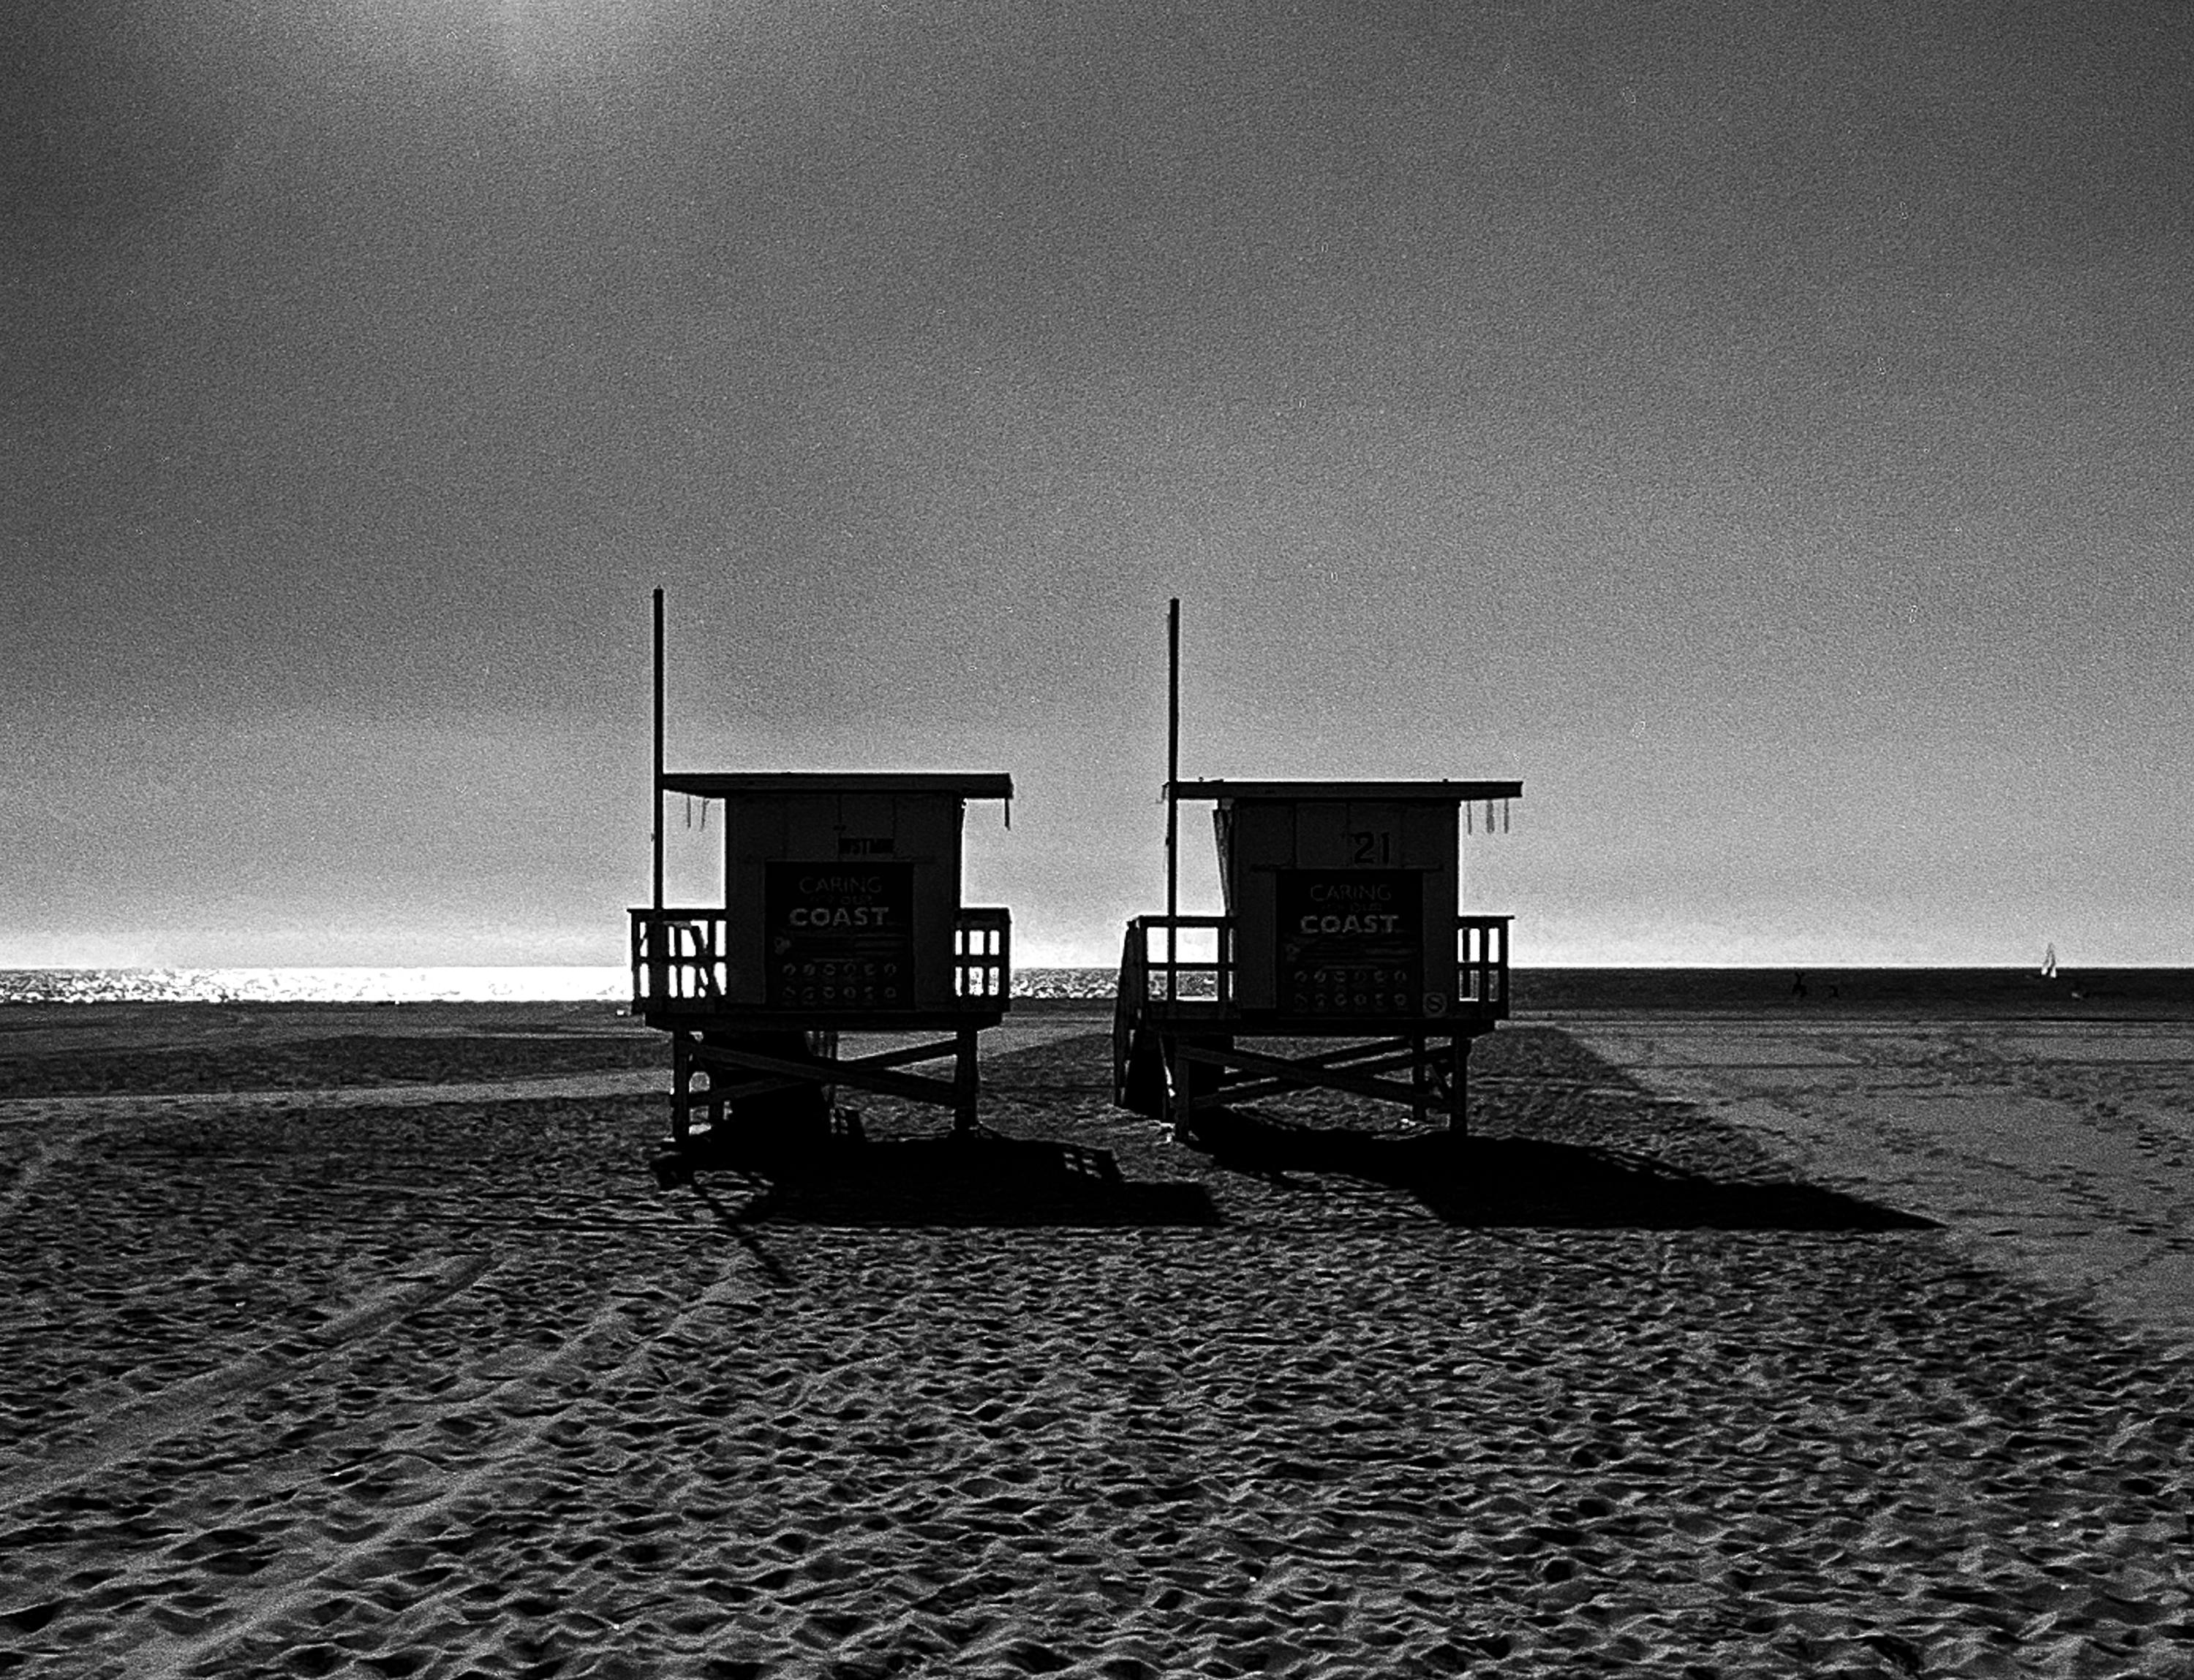 Black and white ocean beach landscape with two lifeguard towers.

Original gallery quality archival pigment print on archival paper signed by the artist.
Limited edition of 6
Paper size: 18